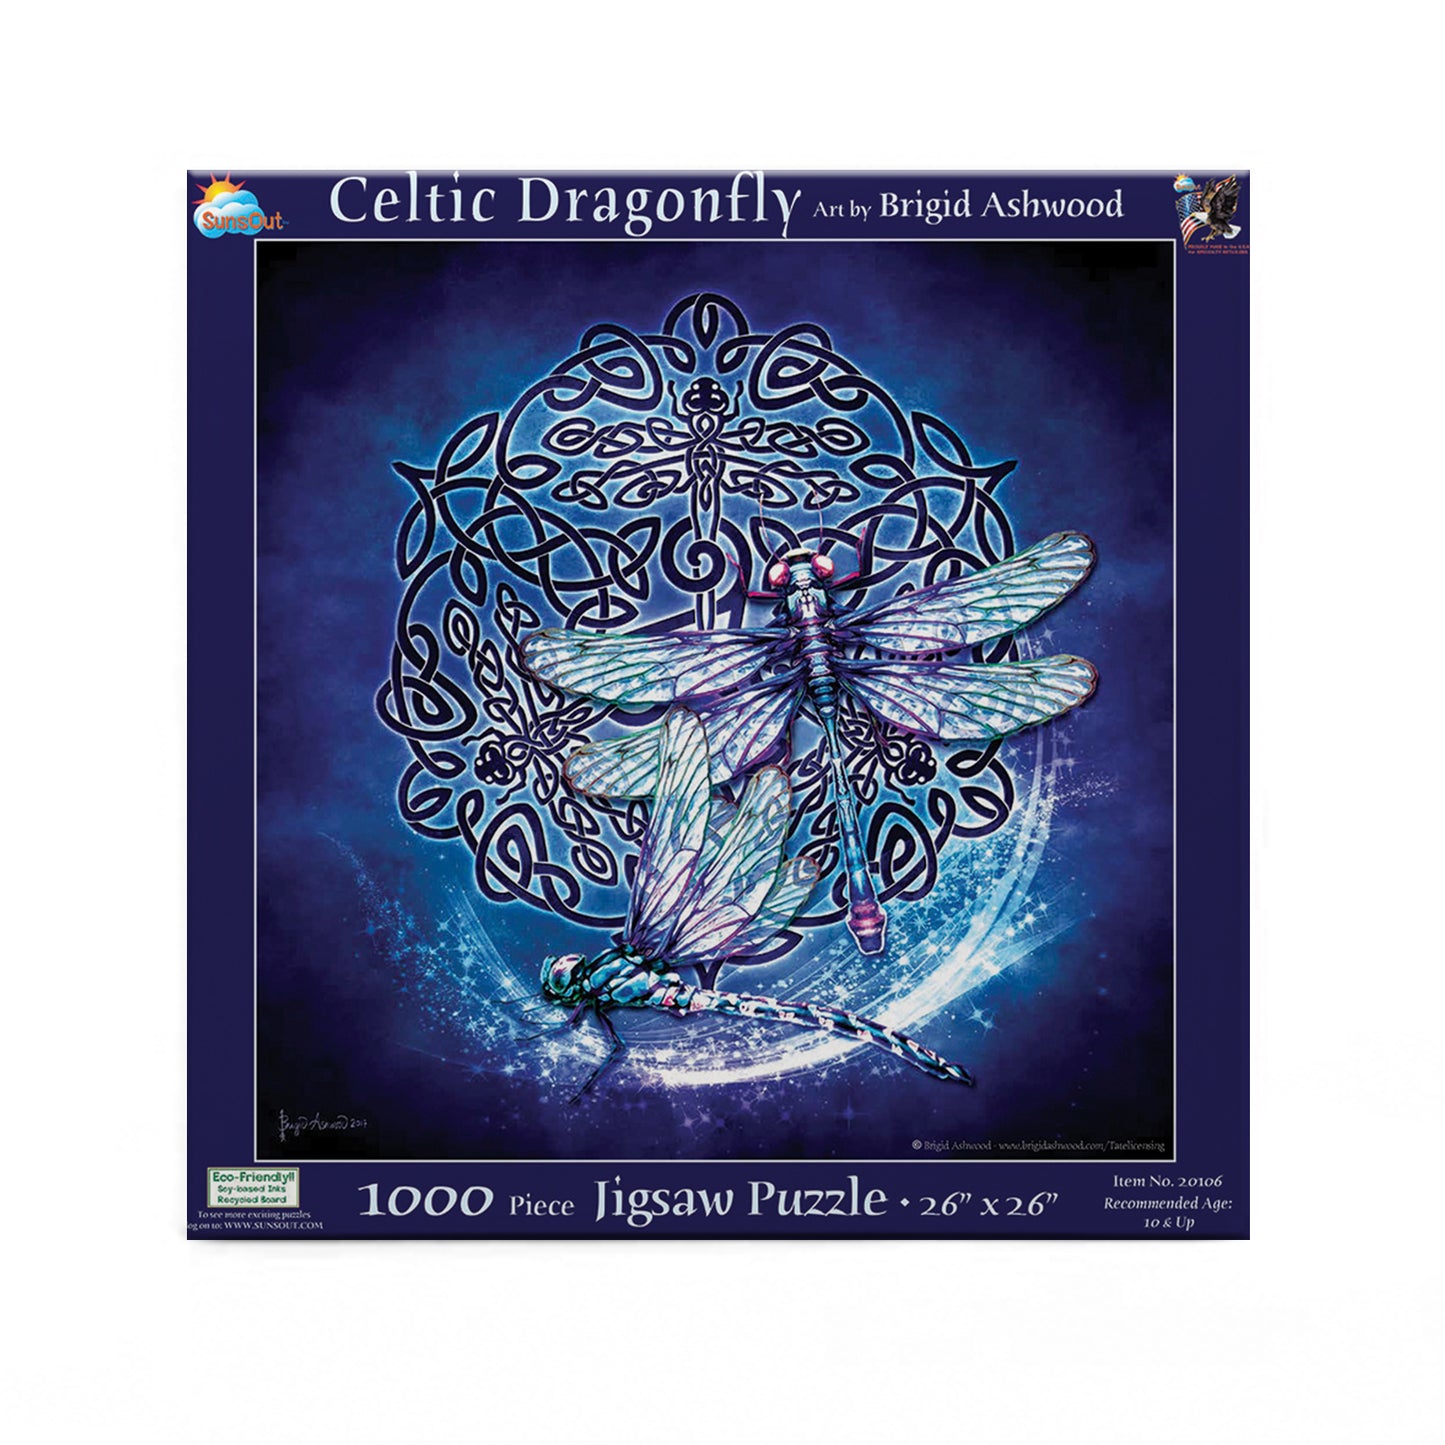 Celtic Dragonfly - 1000 Piece Jigsaw Puzzle